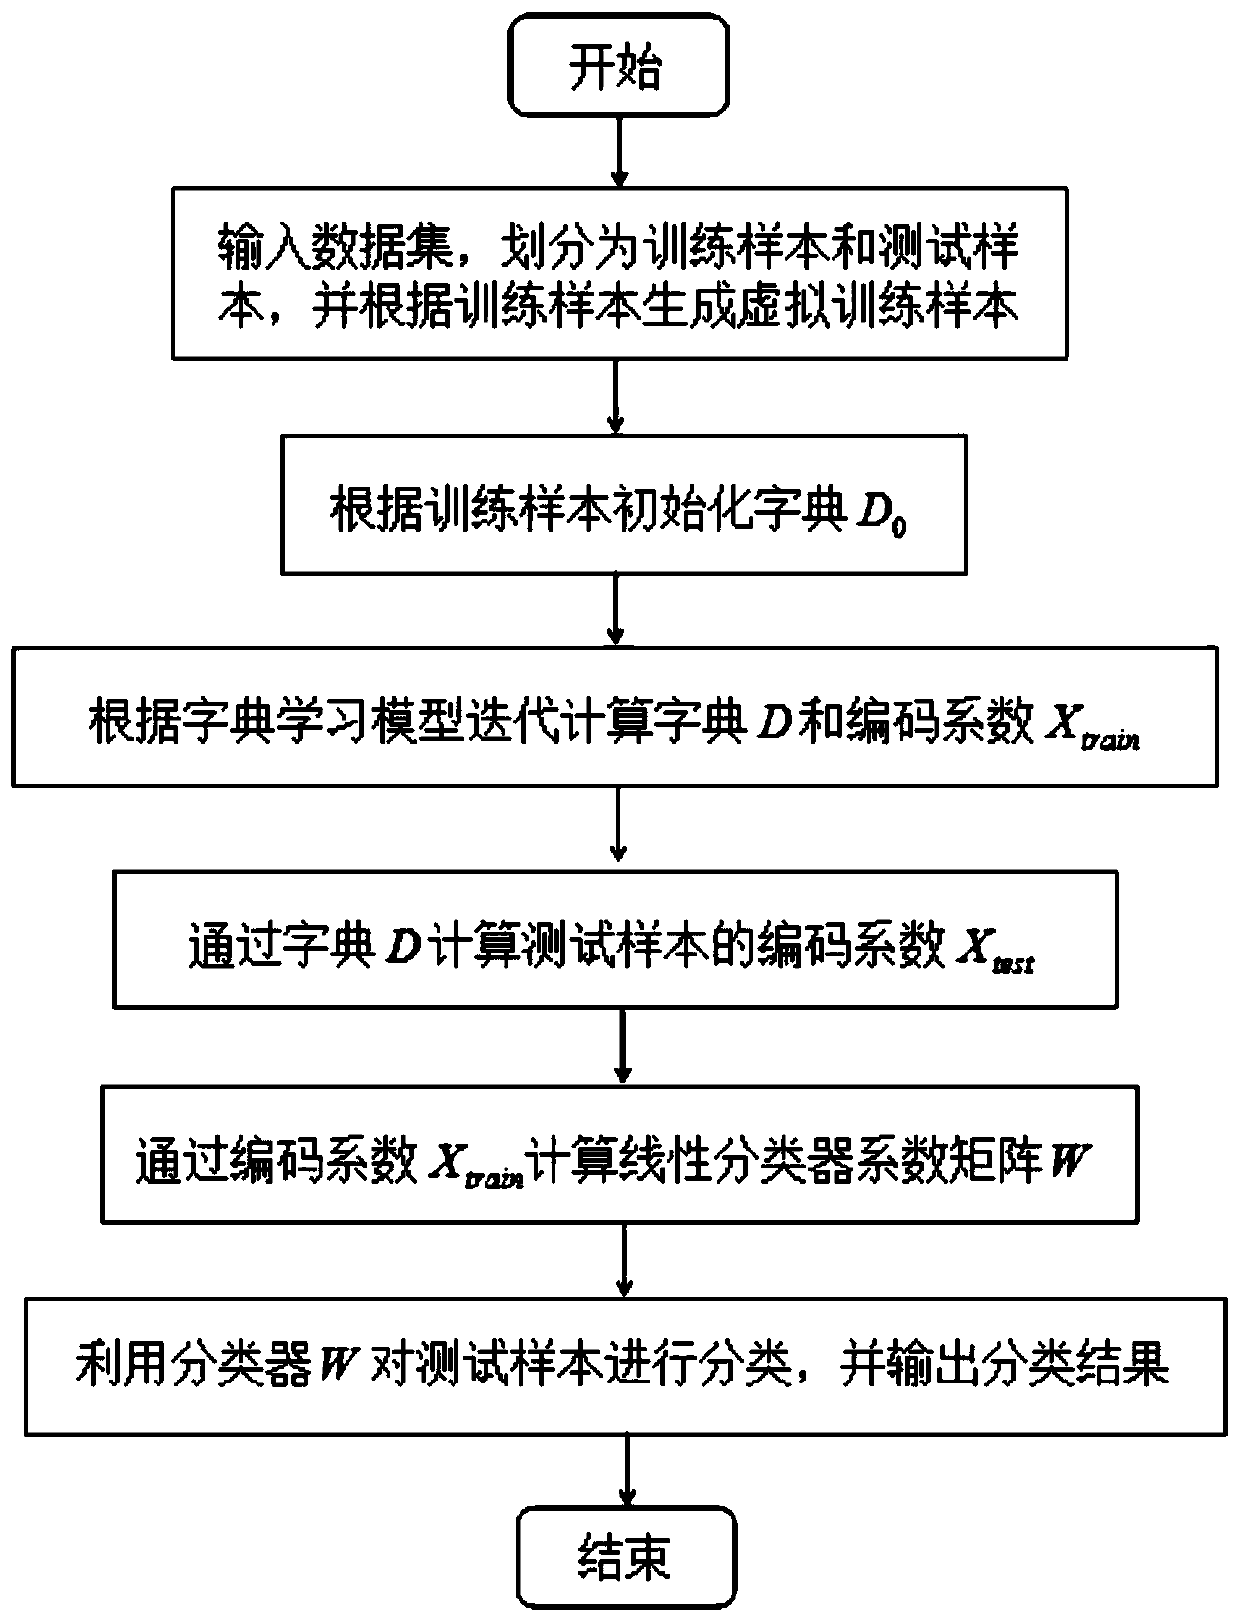 Image classification method based on multi-sample dictionary learning and local constraint coding